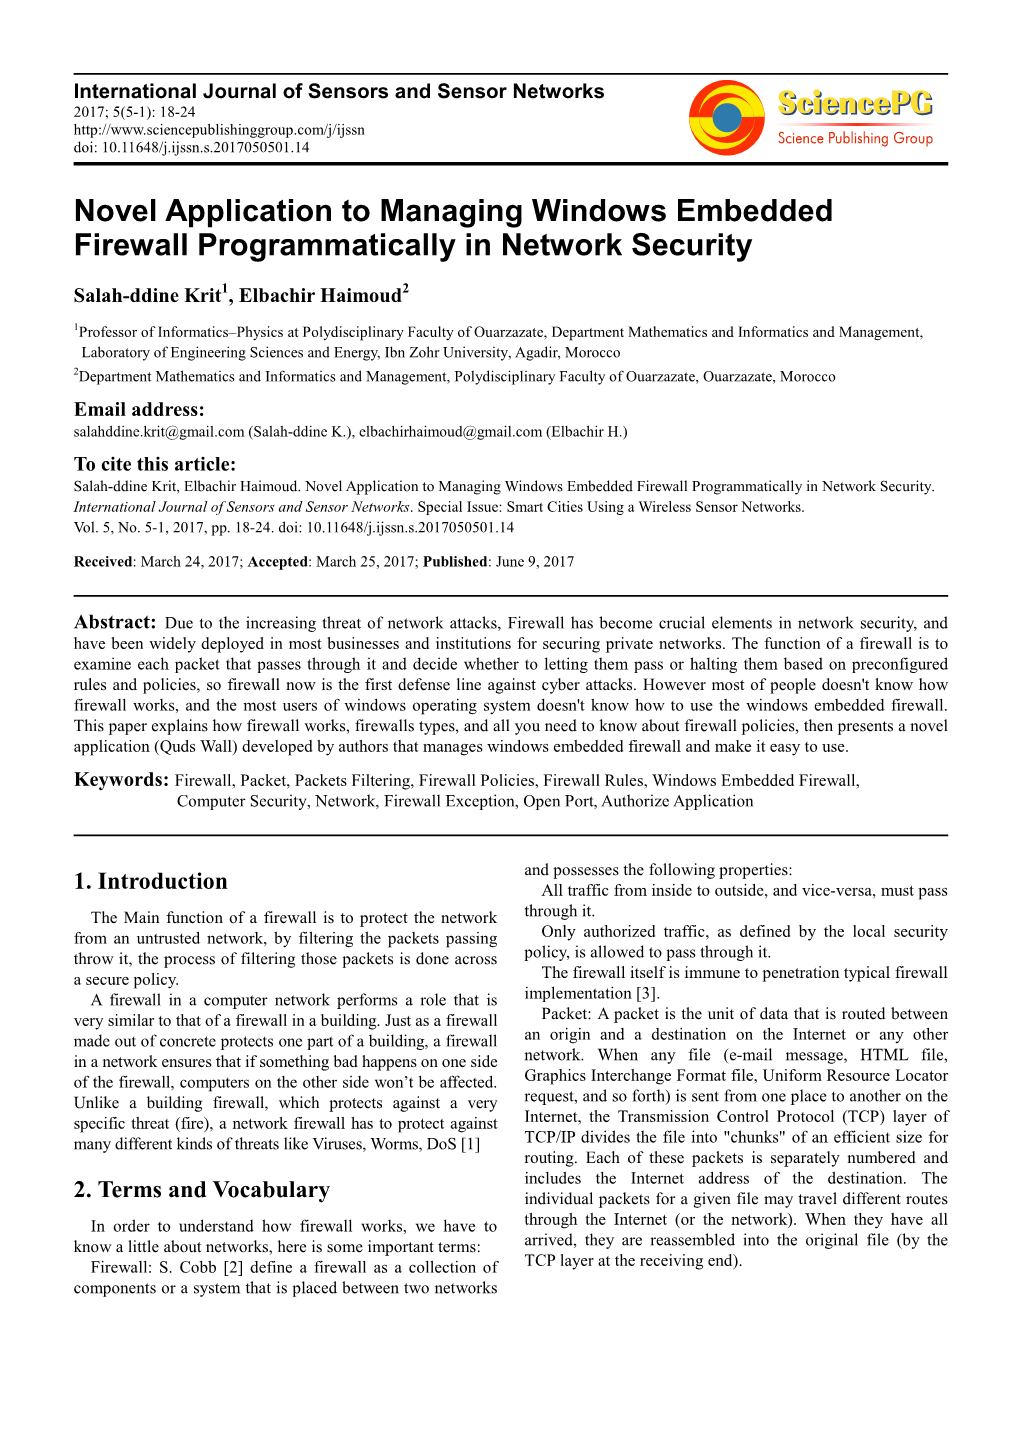 Novel Application to Managing Windows Embedded Firewall Programmatically in Network Security